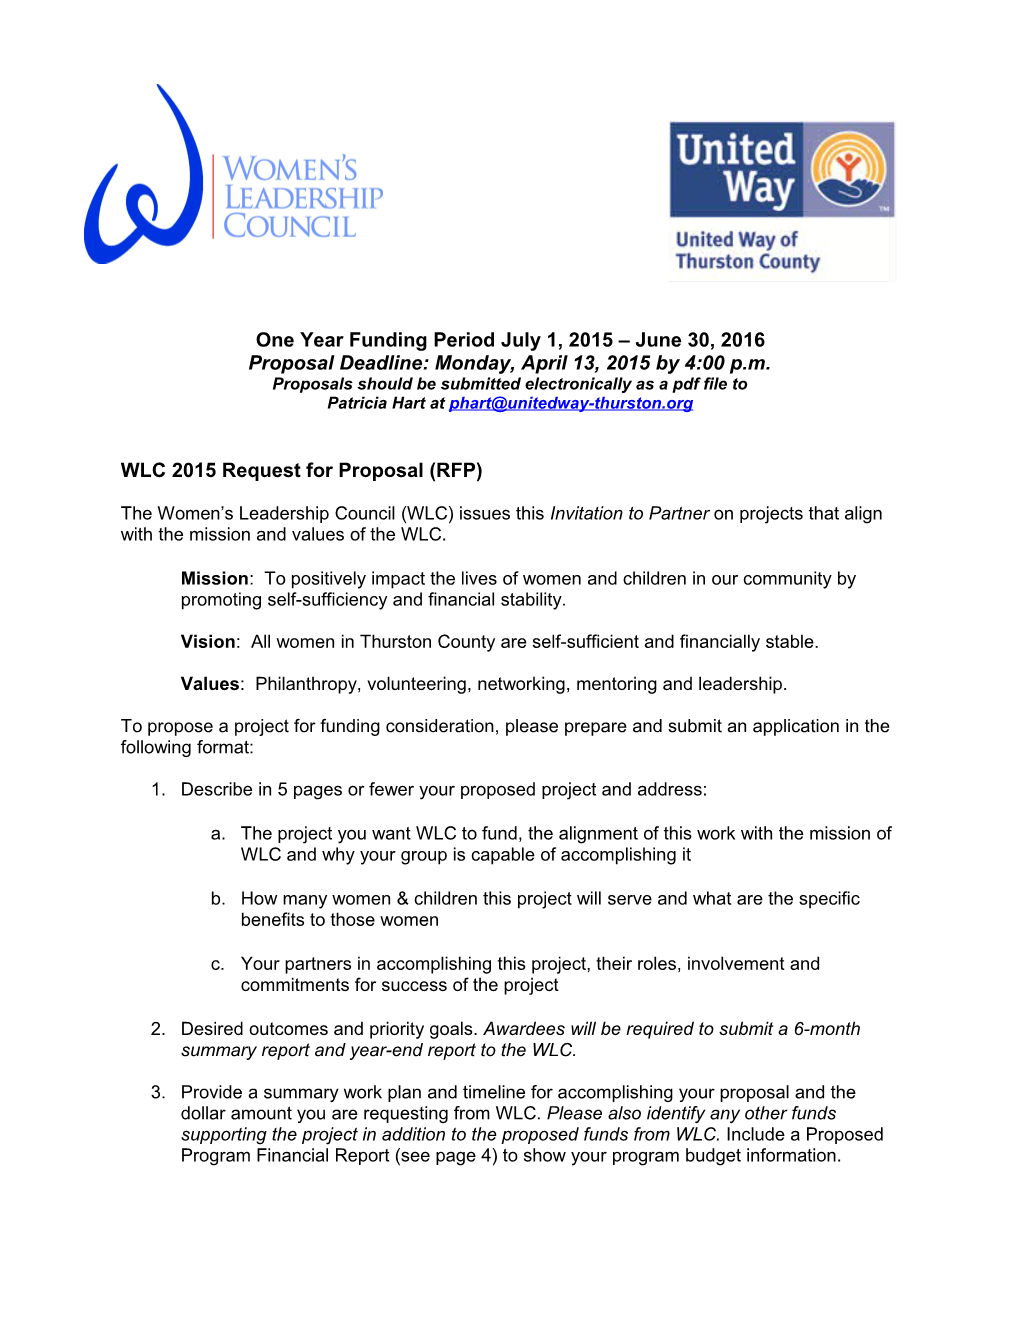 WLC 2015 Request for Proposal (RFP)